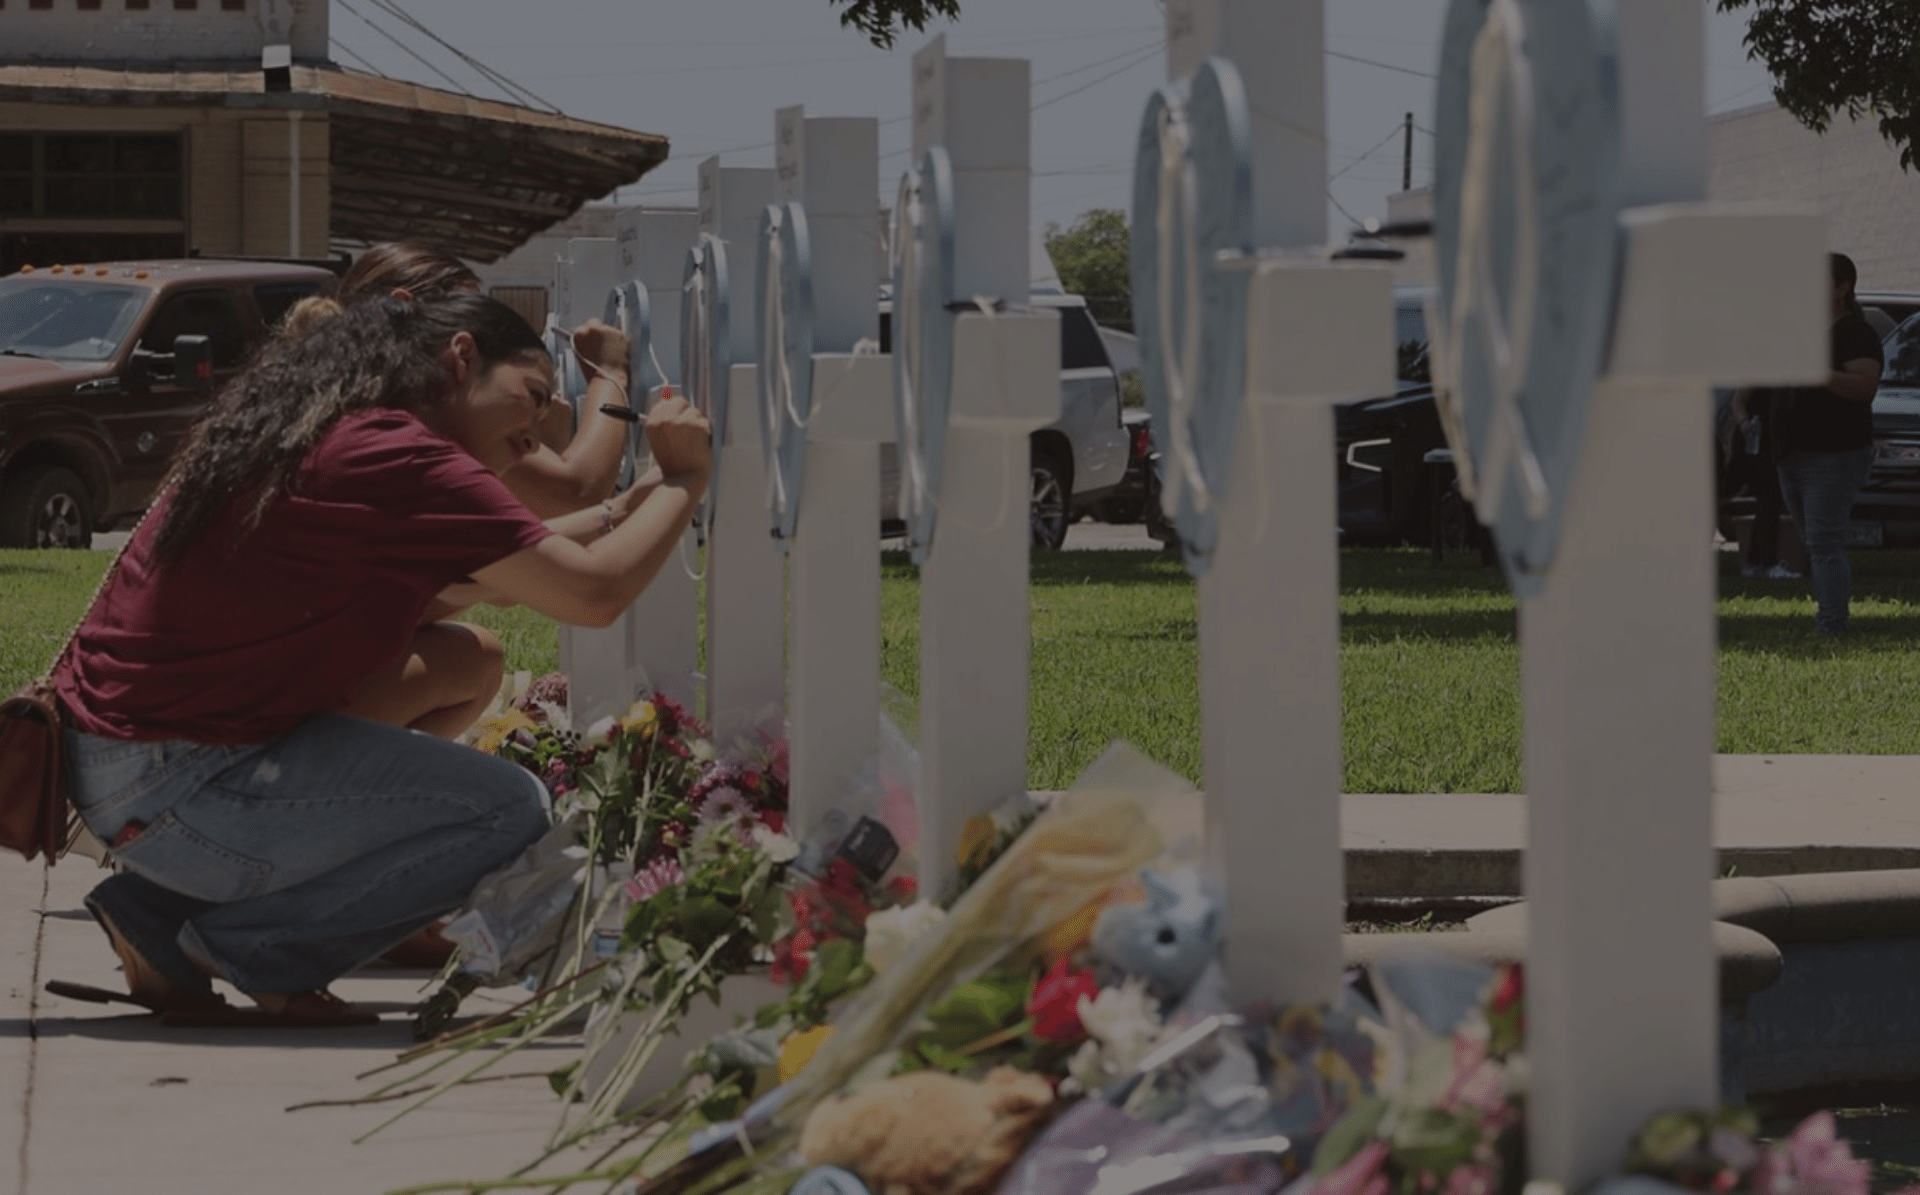 Women leaning to sign crosses set at Uvalde memorial for victims of gun violence